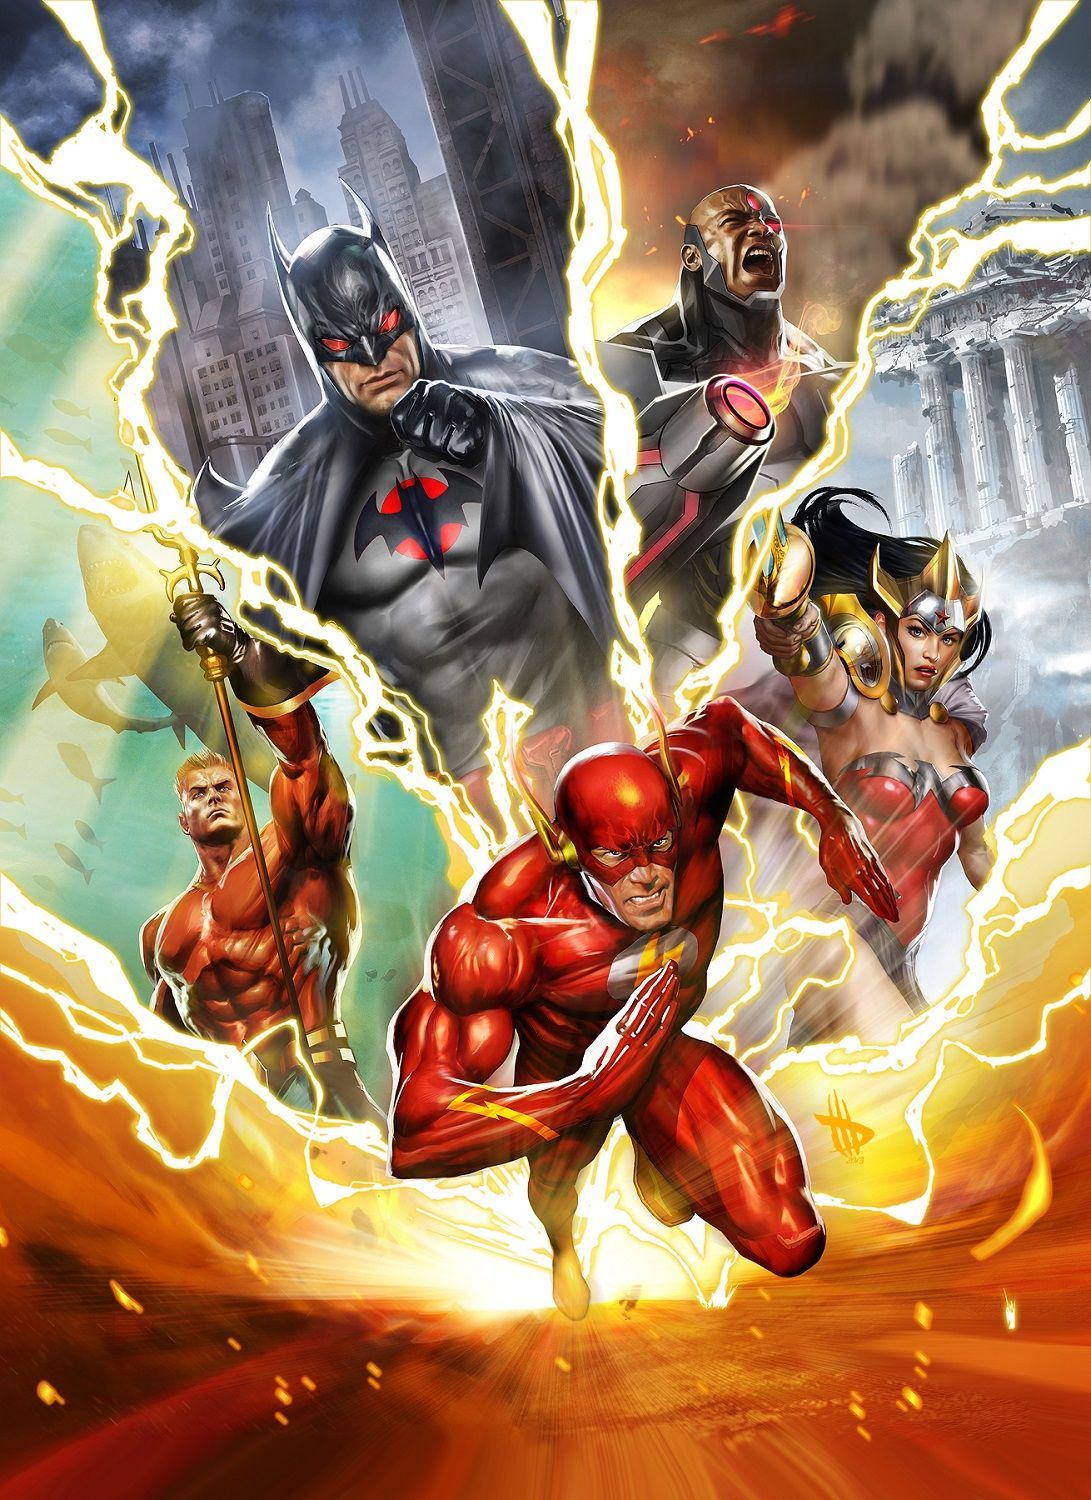 JUSTICE LEAGUE: THE FLASHPOINT PARADOX. Flash point paradox, Justice league, Animated movies